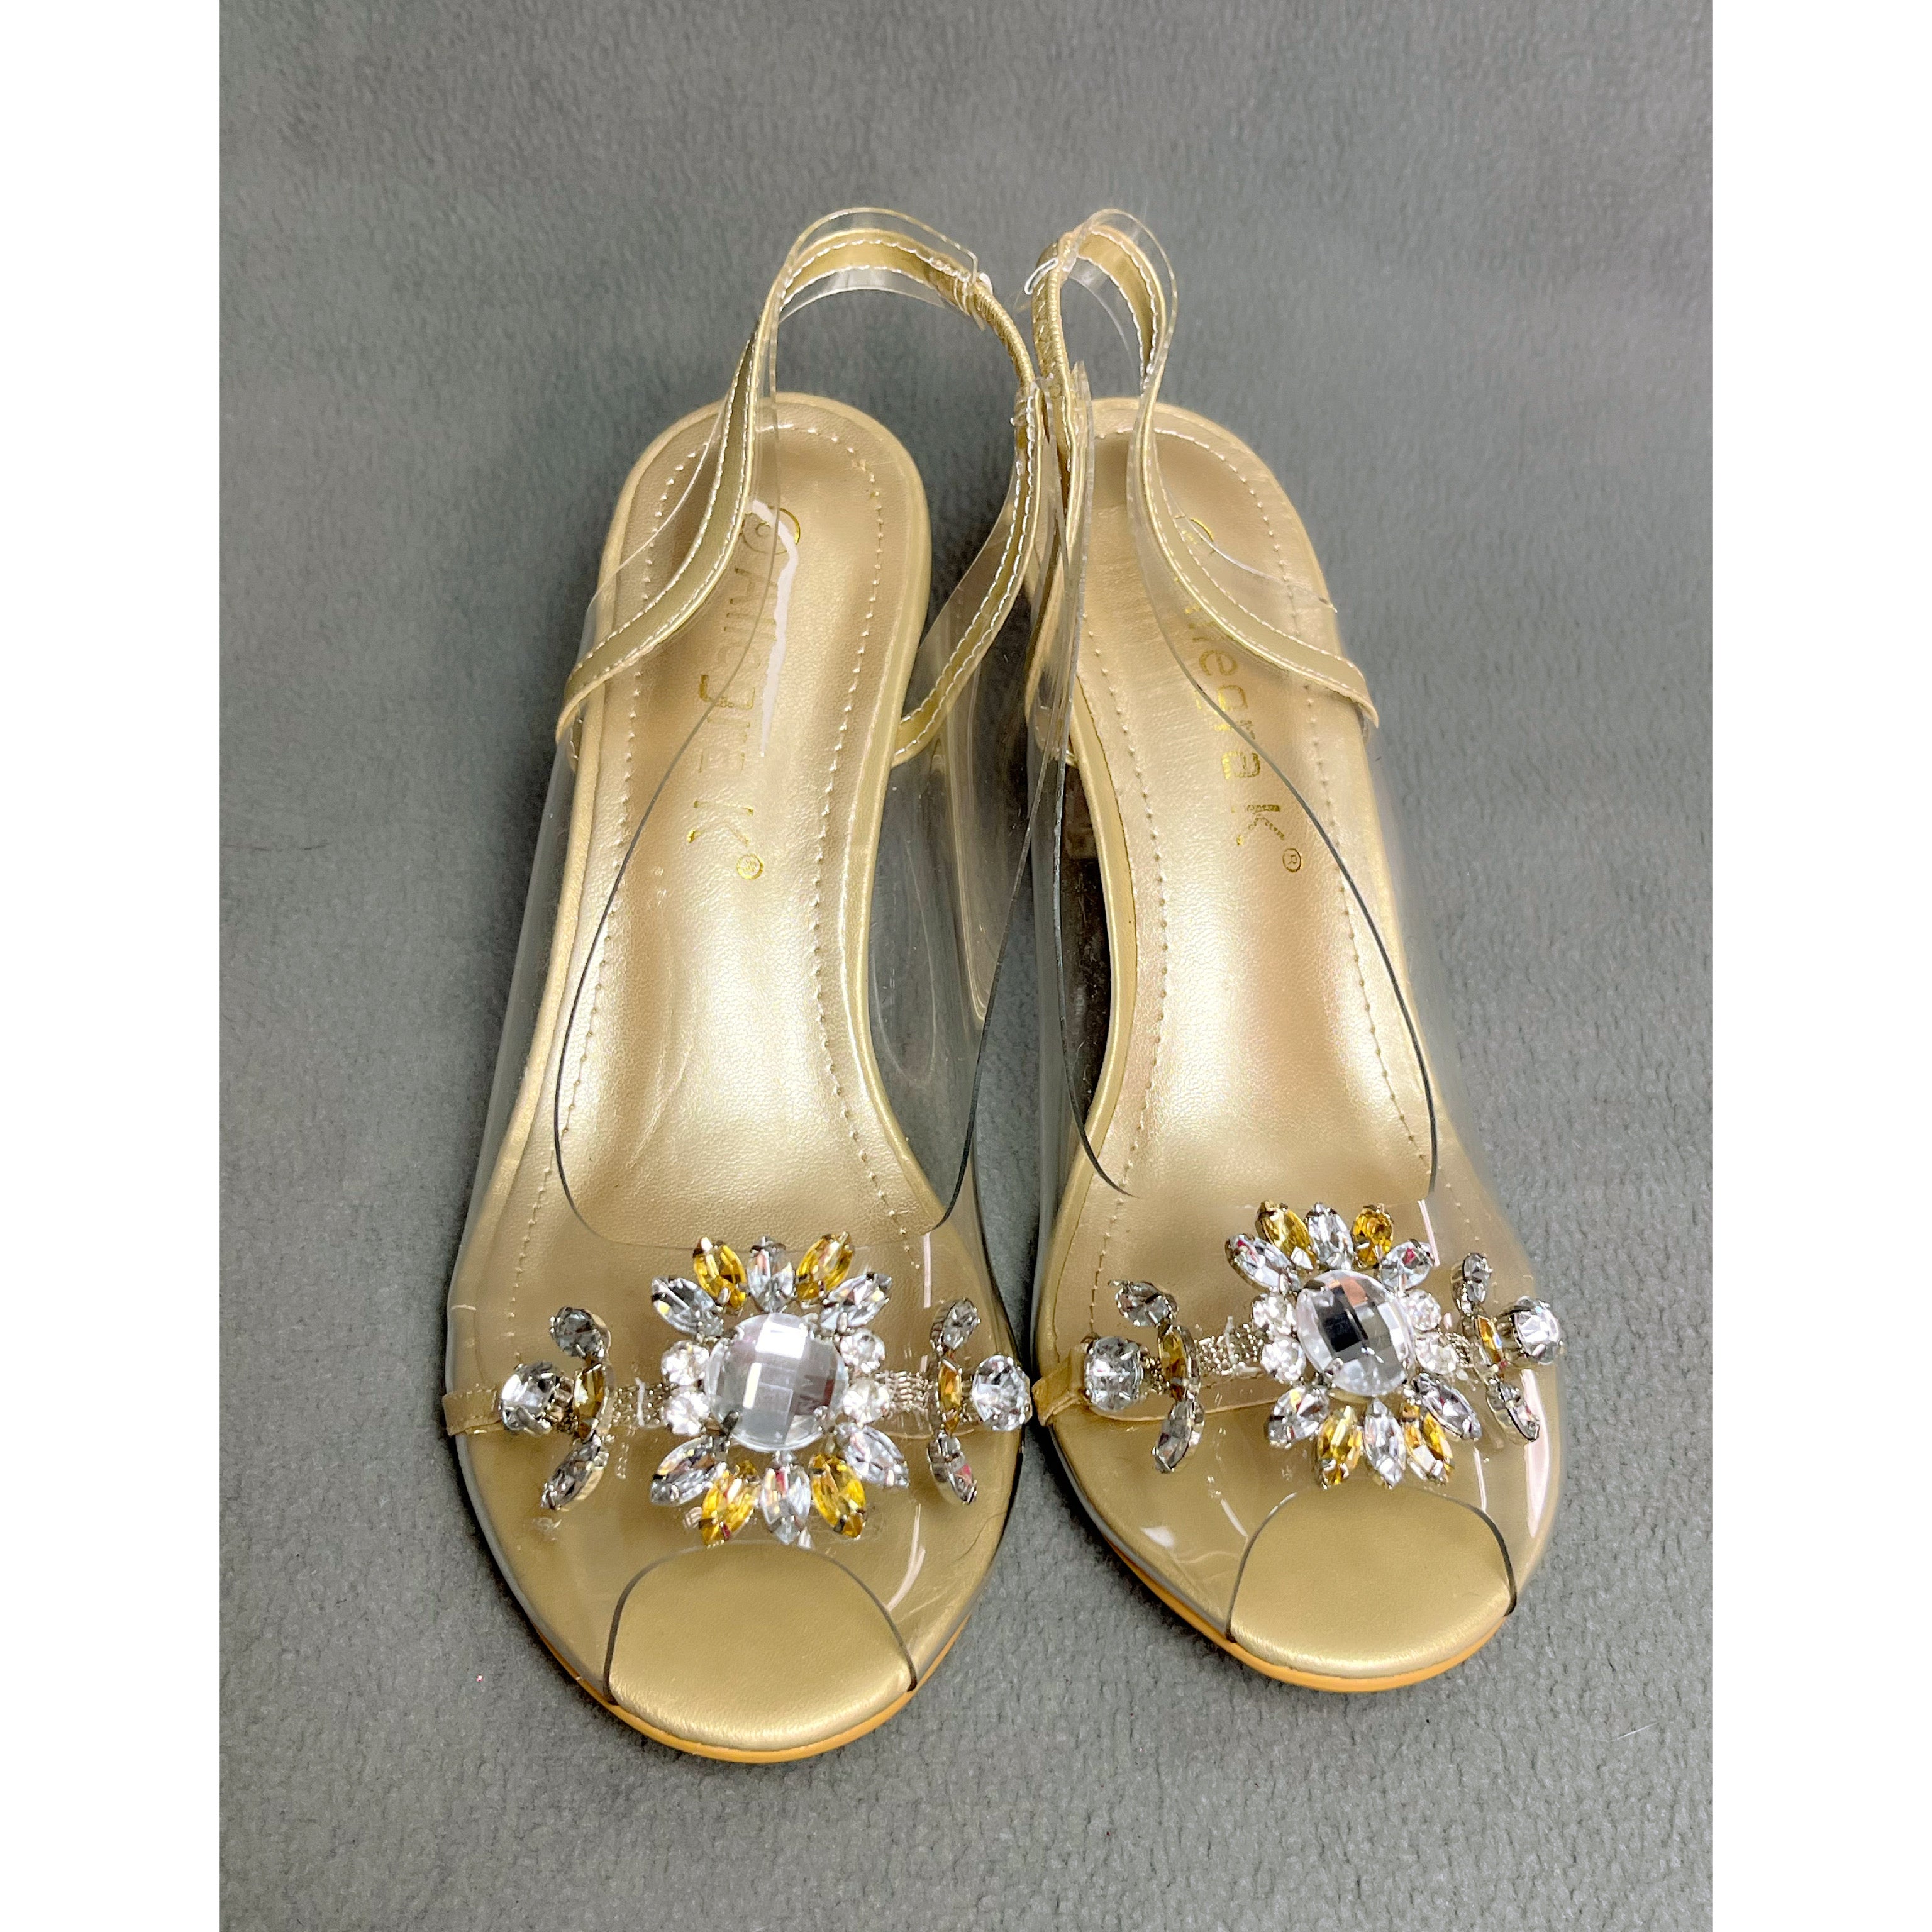 Allegra K gold shoes, size 8